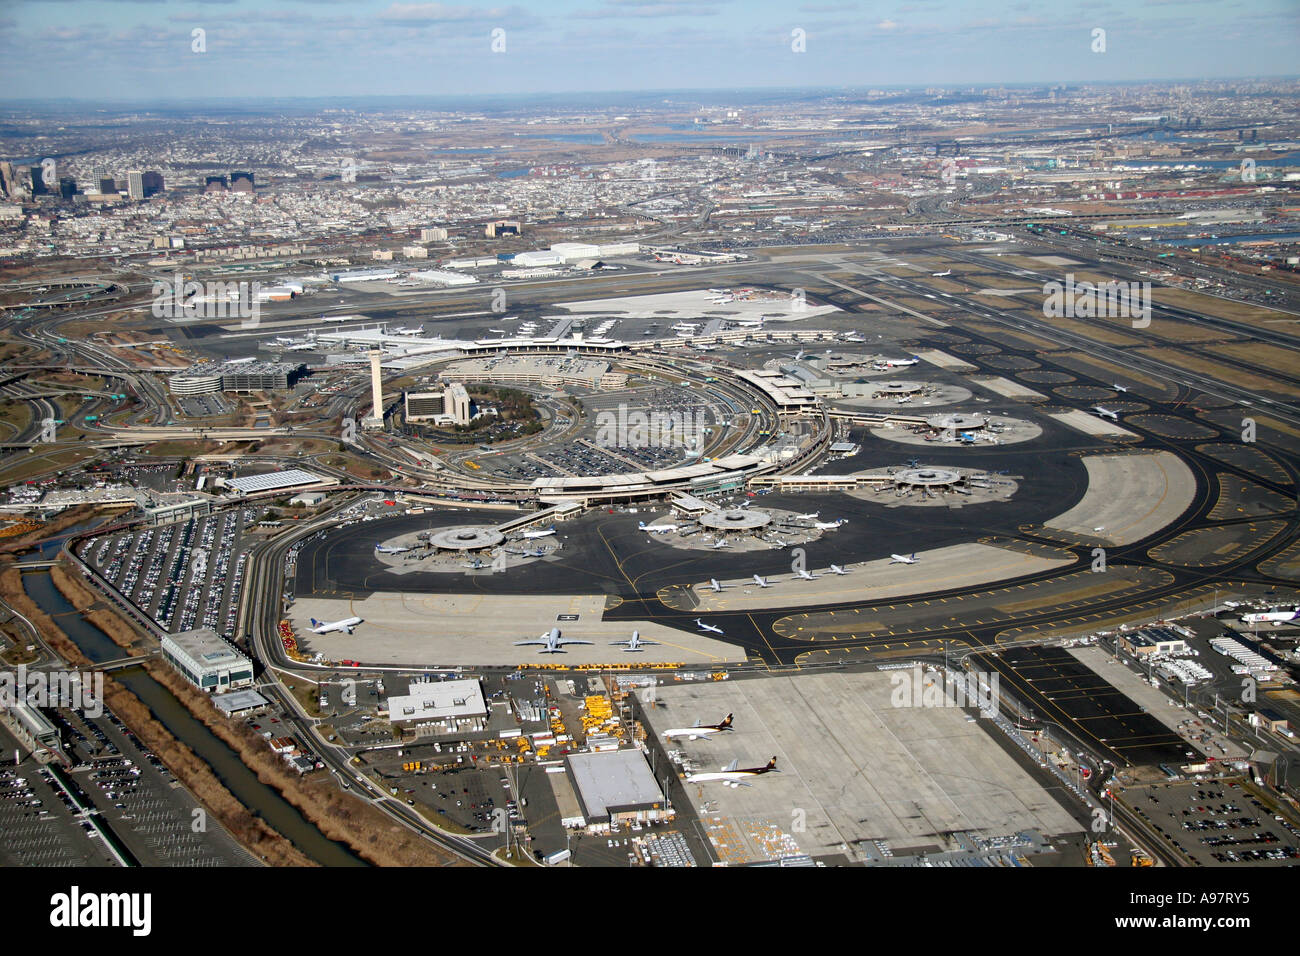 Aerial view of Newark Liberty International Airport, located in Newark, New  Jersey, U.S.A Stock Photo - Alamy